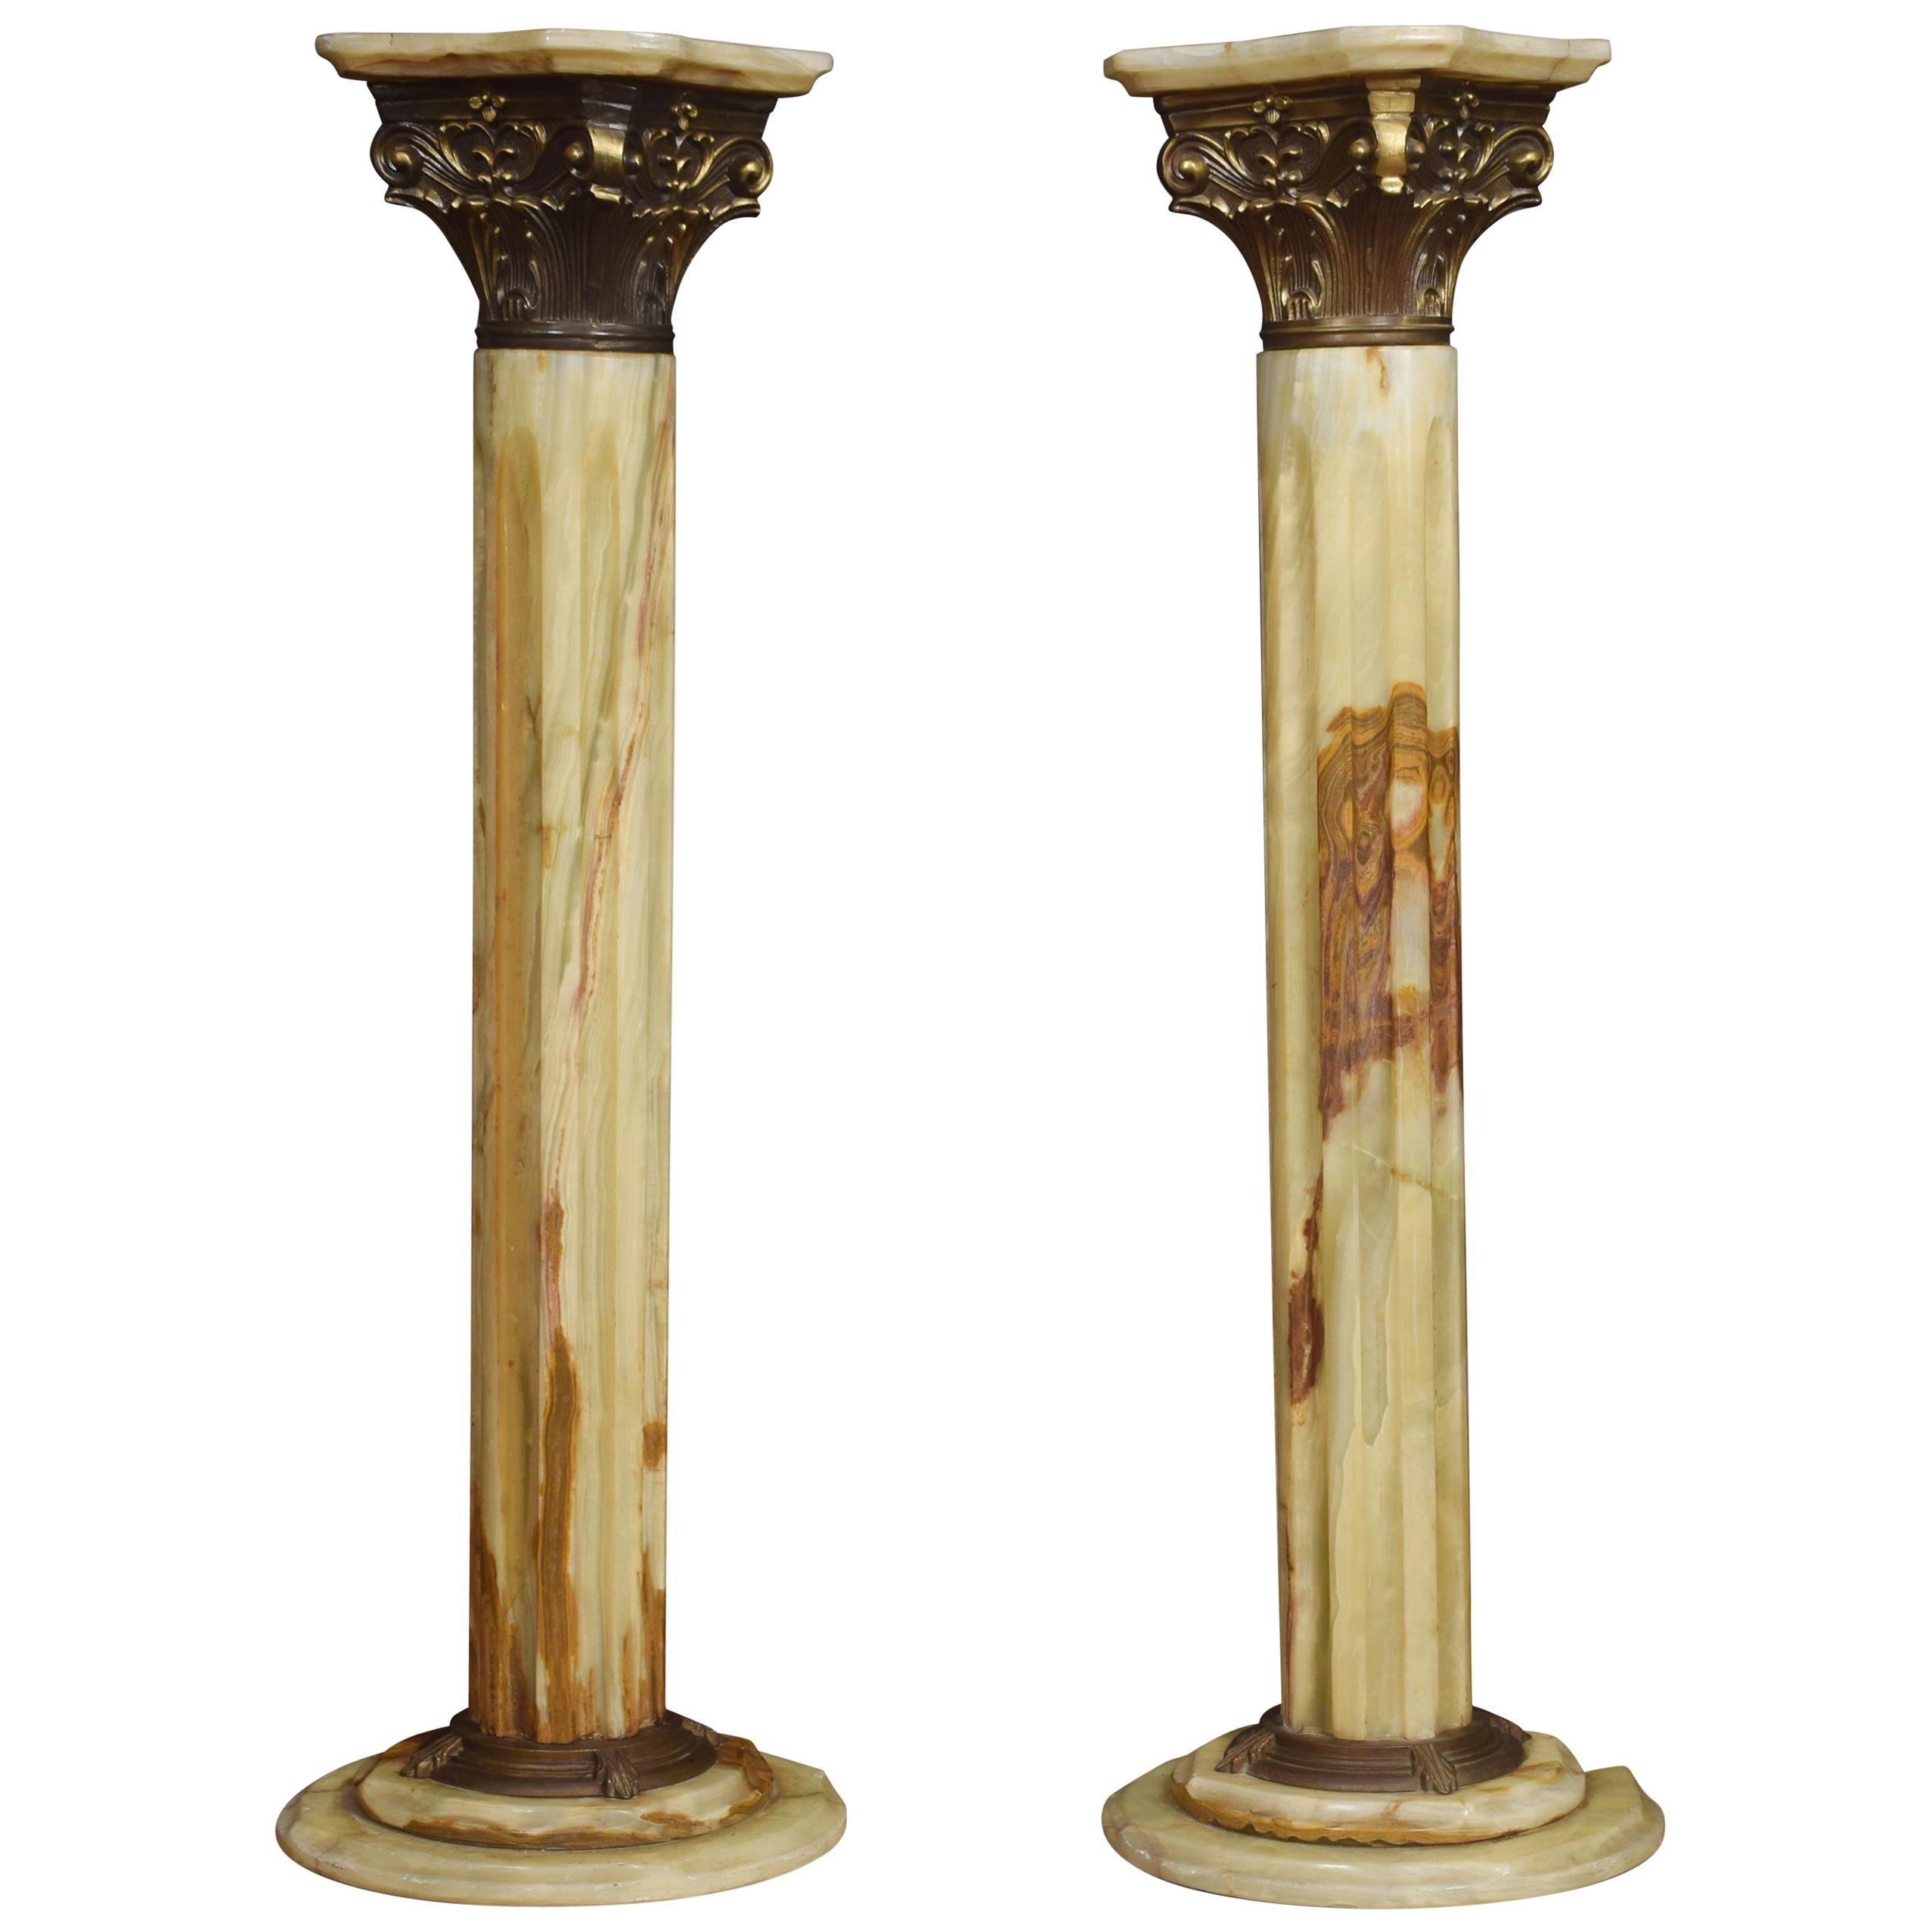 Pair of Onyx and Gilt Metal Mounted Pedestals